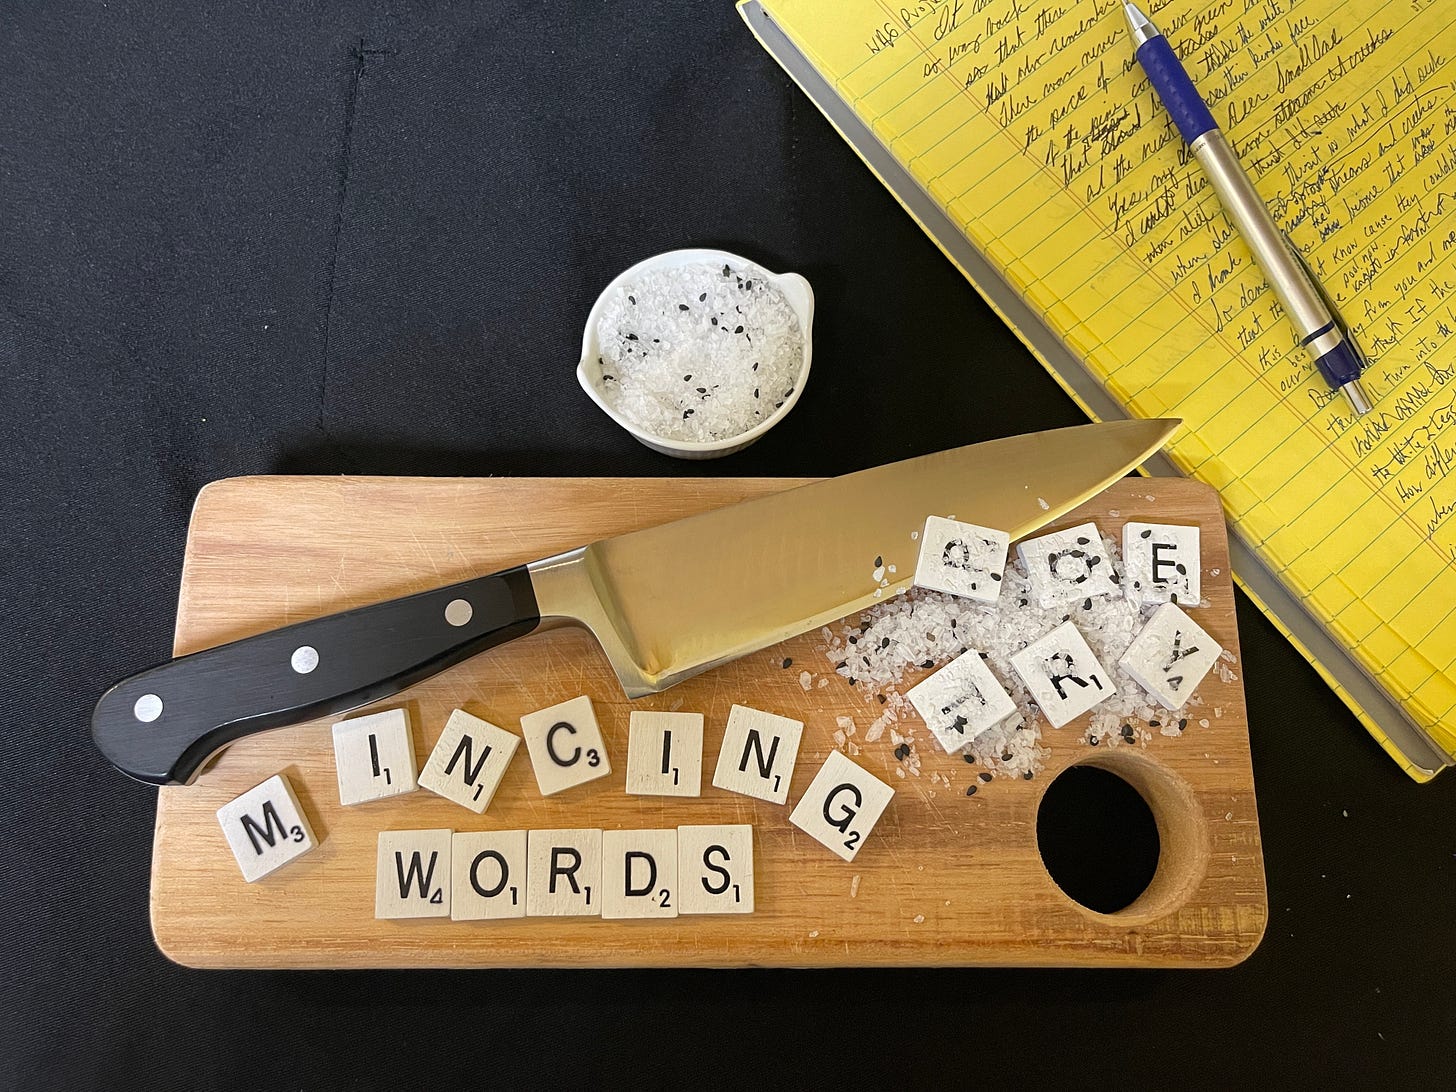 The phrase “mincing words”spelled out in scrabble letters is on the left side of a wood cutting board. A chef’s knife lays diagonally across the cutting board just above the “mincing words” phrase.  The letter “P” lays on part of the knife, while the other scrabble letters that spell out “poetry” are mixed in with a pile of finely chopped (minced) white and black pieces.  In the upper right of the picture is a yellow lined notepad full of prose written out in cursive form and a silver and blue pen laying on the notepad.